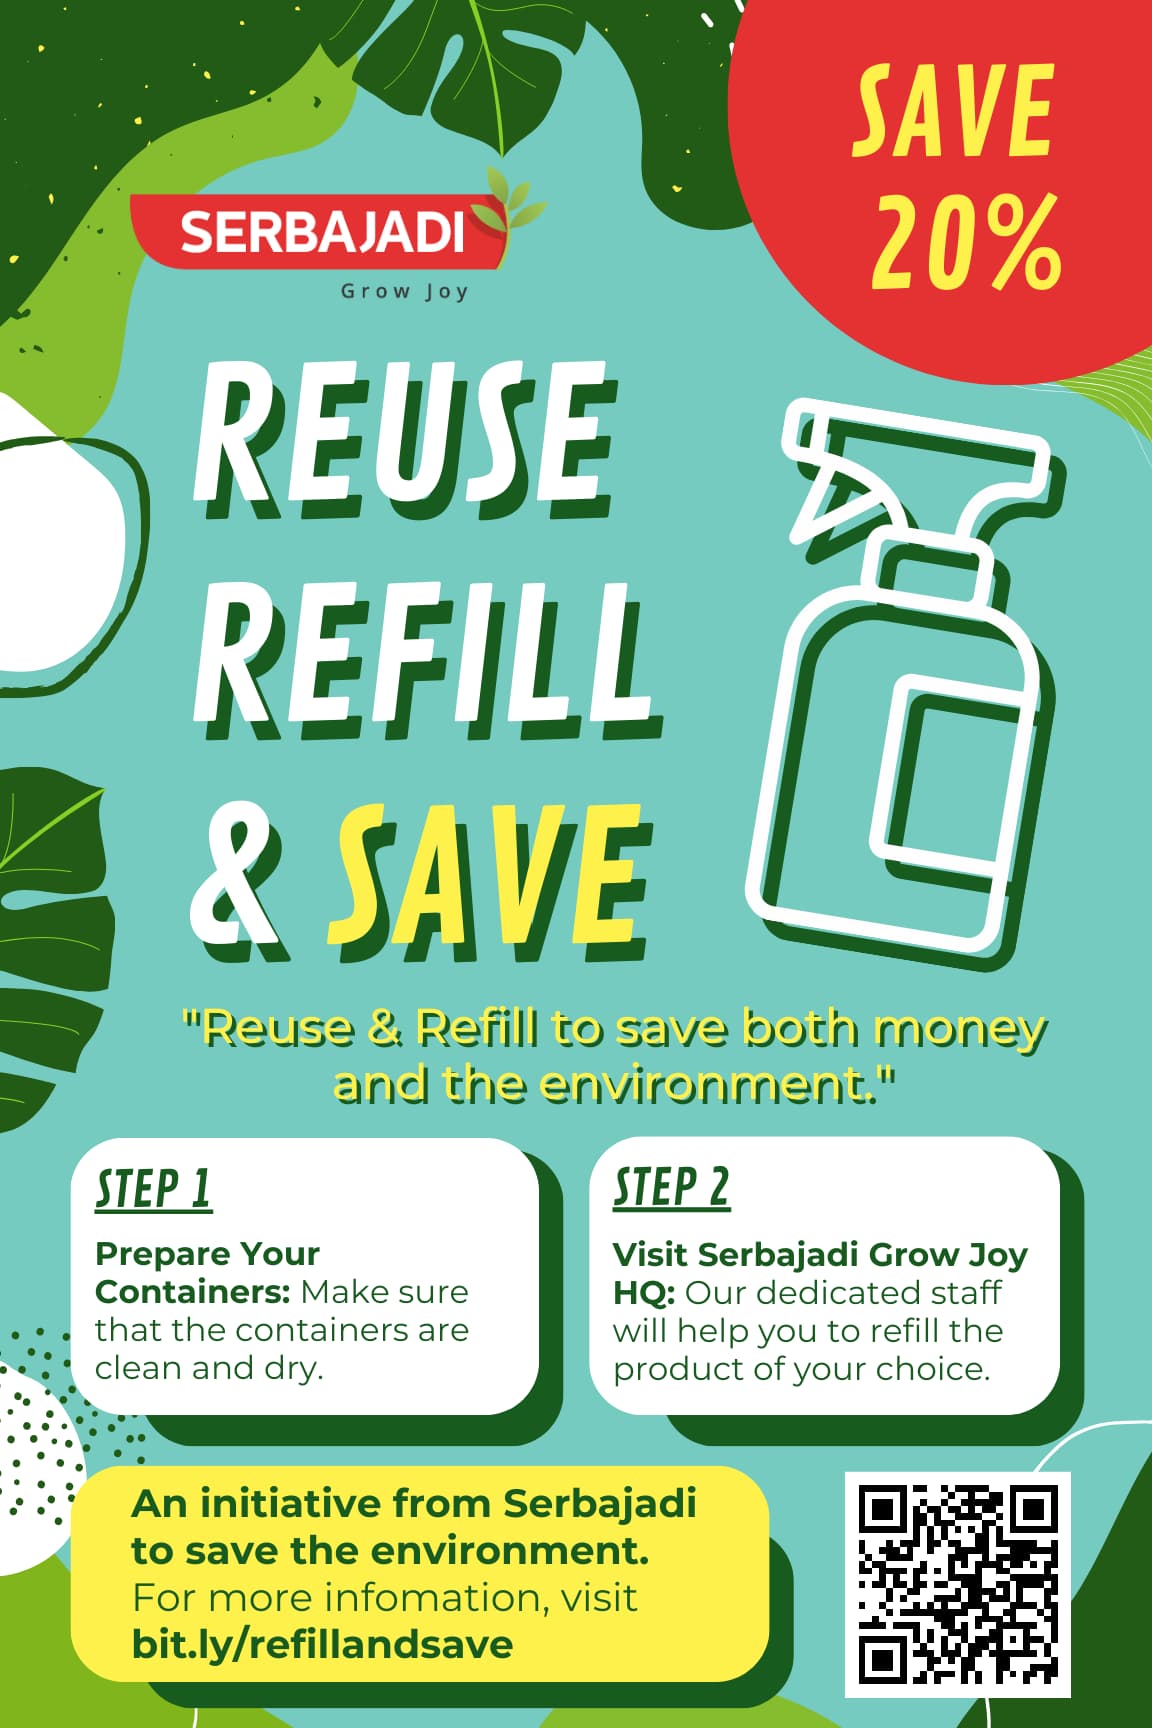 Refill and save